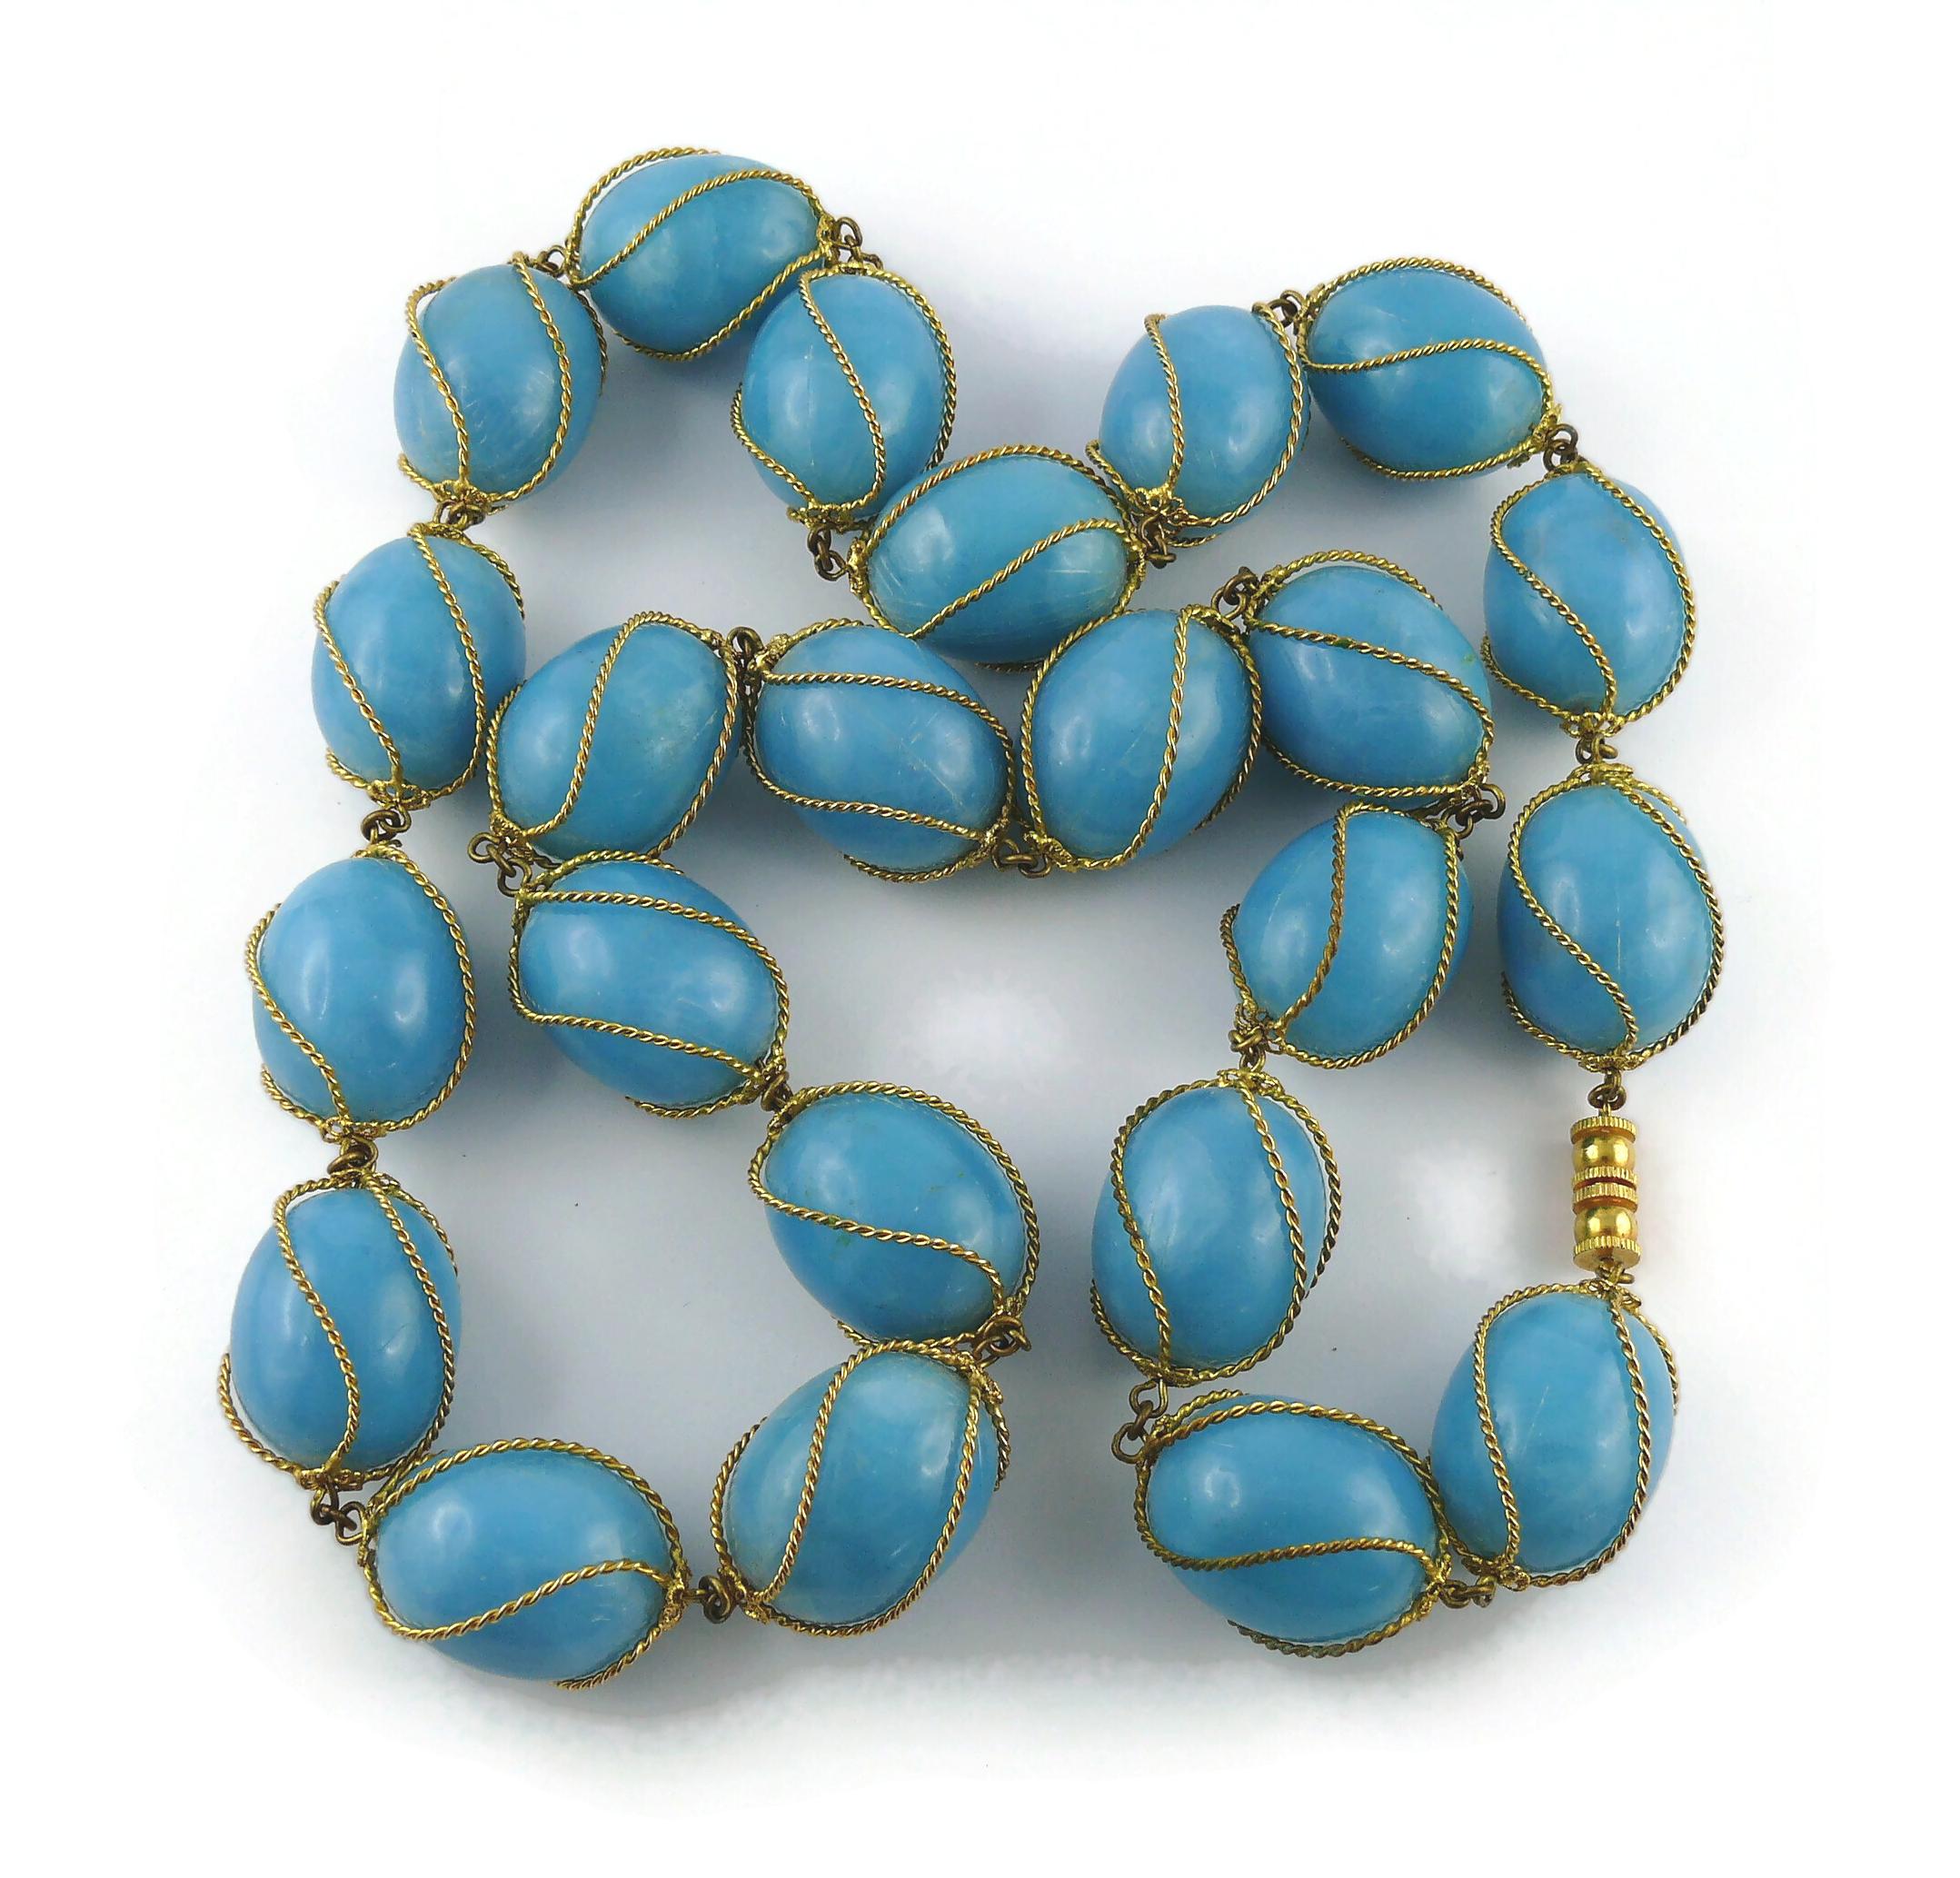 Christian Dior Vintage Encaged Blue Resin Beads Necklace and Earrings Set 1966 For Sale 2